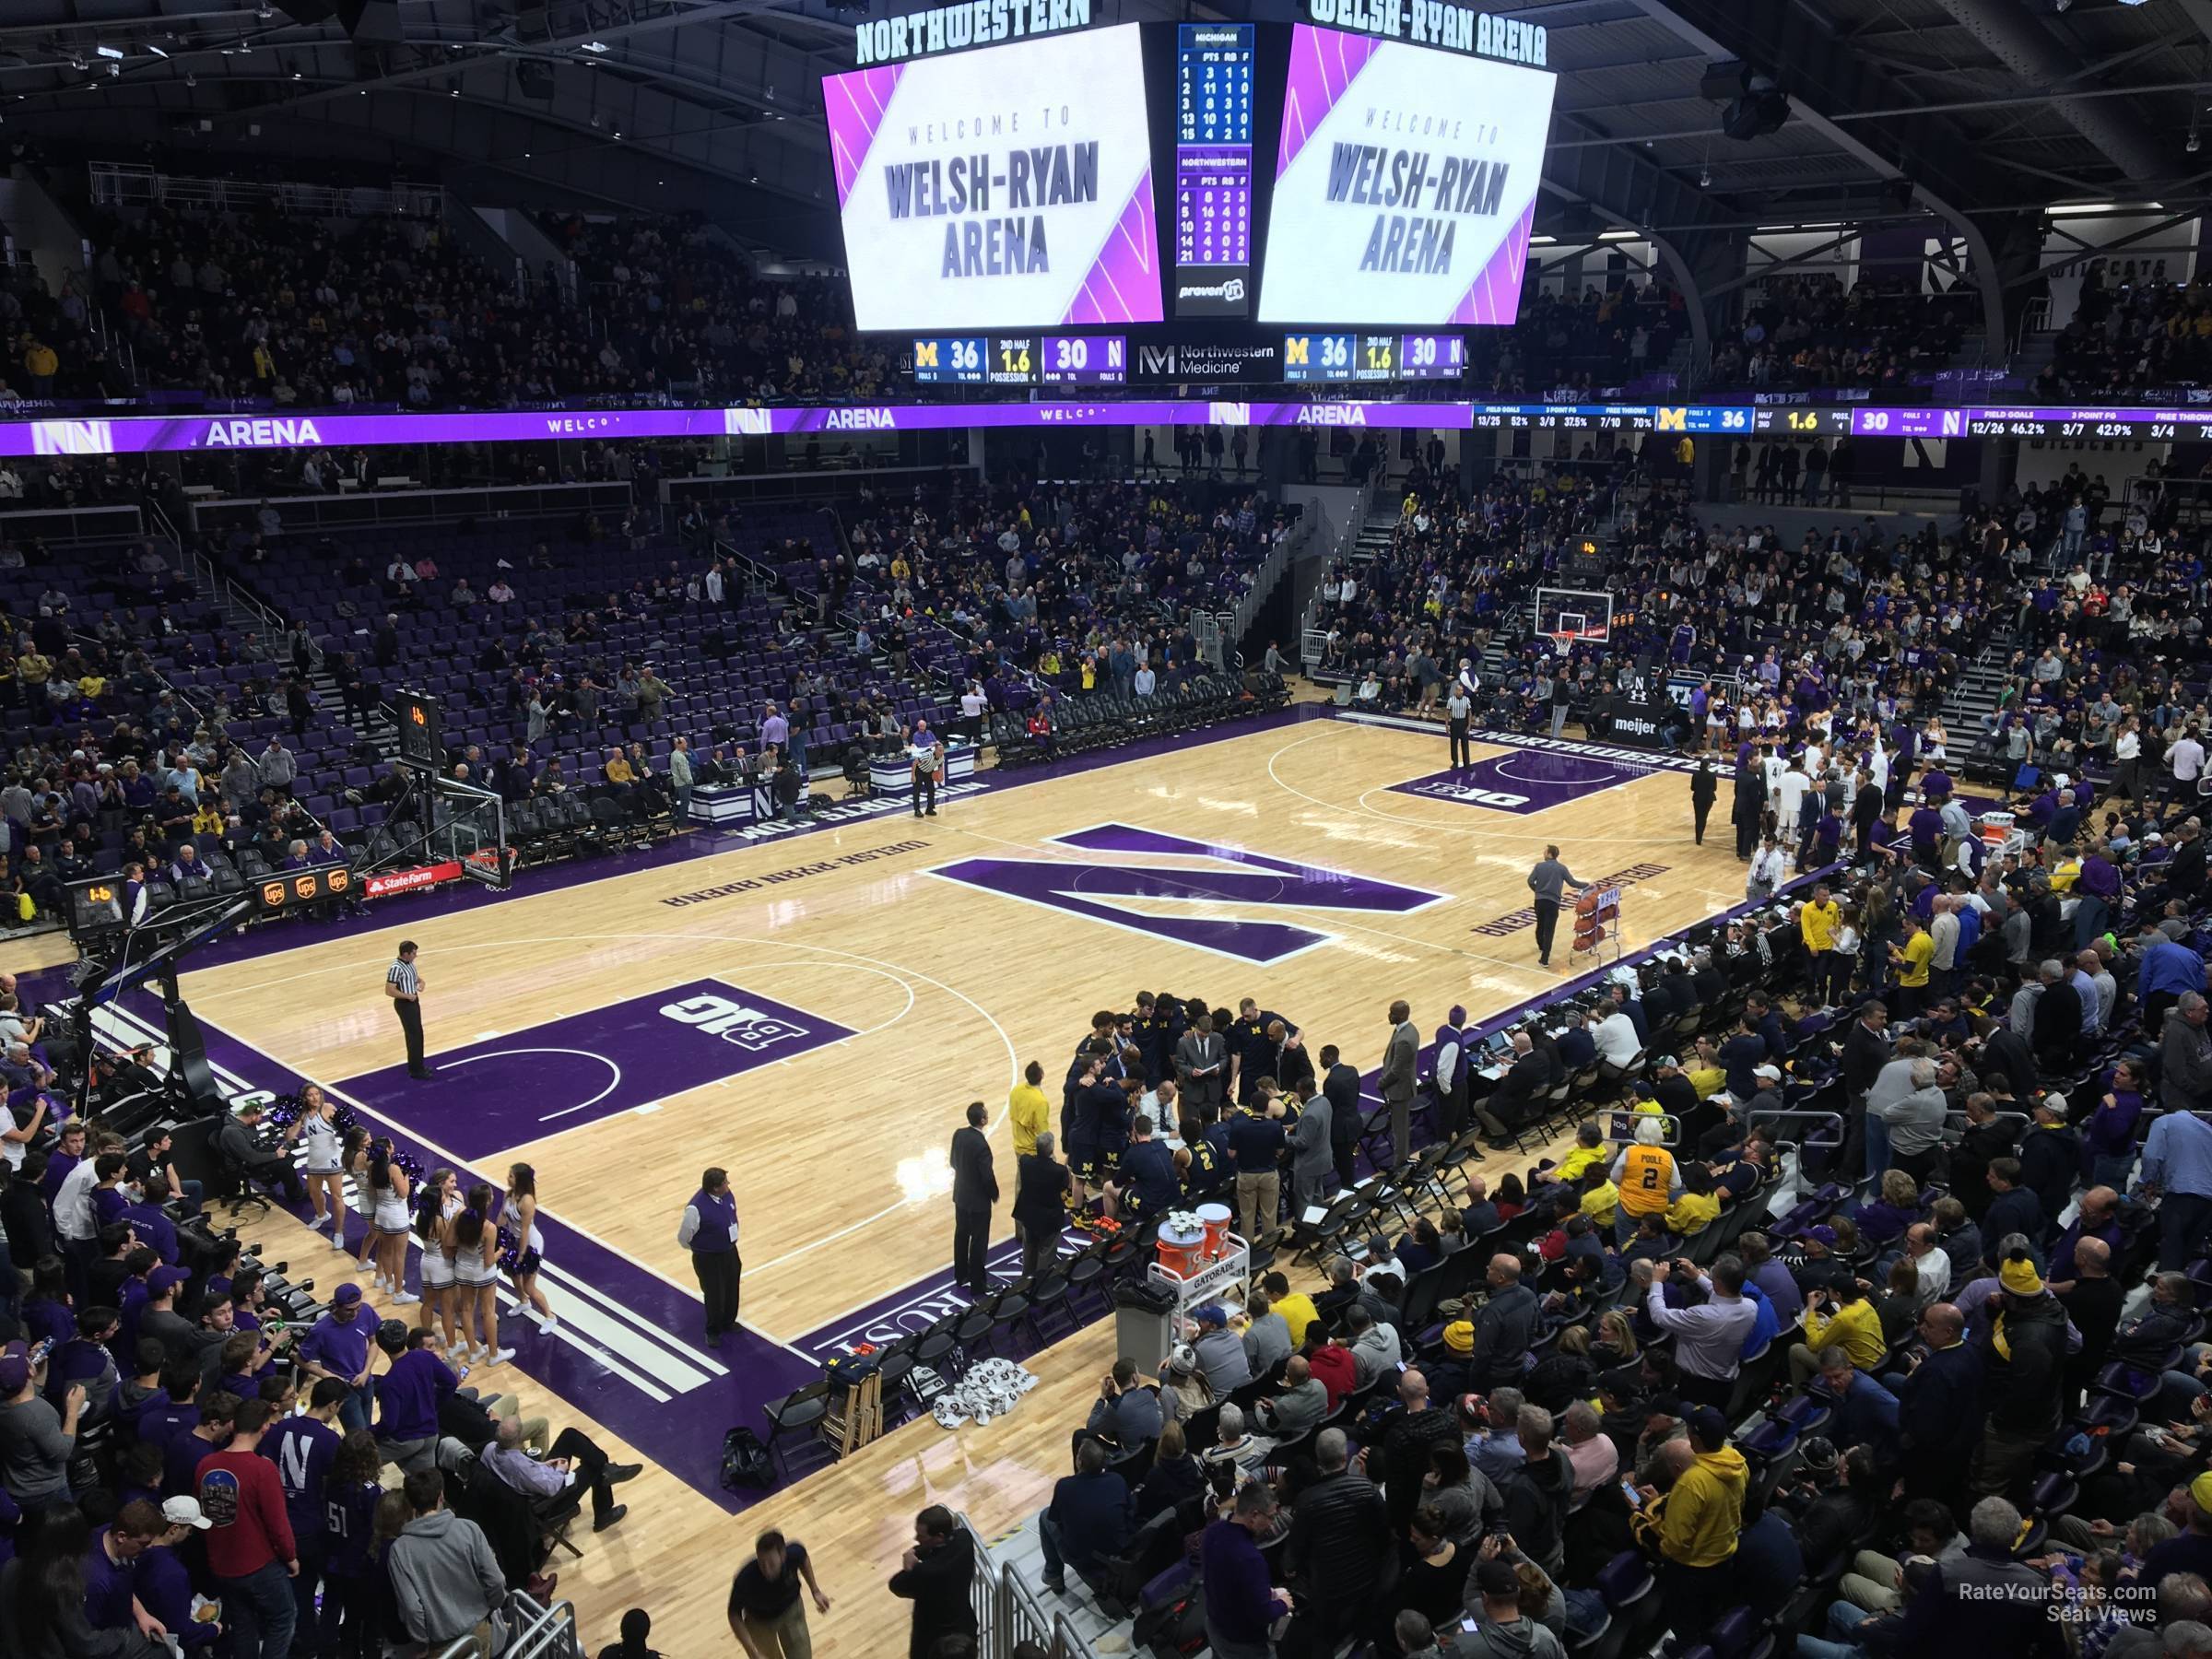 section 211, row 1 seat view  - welsh-ryan arena